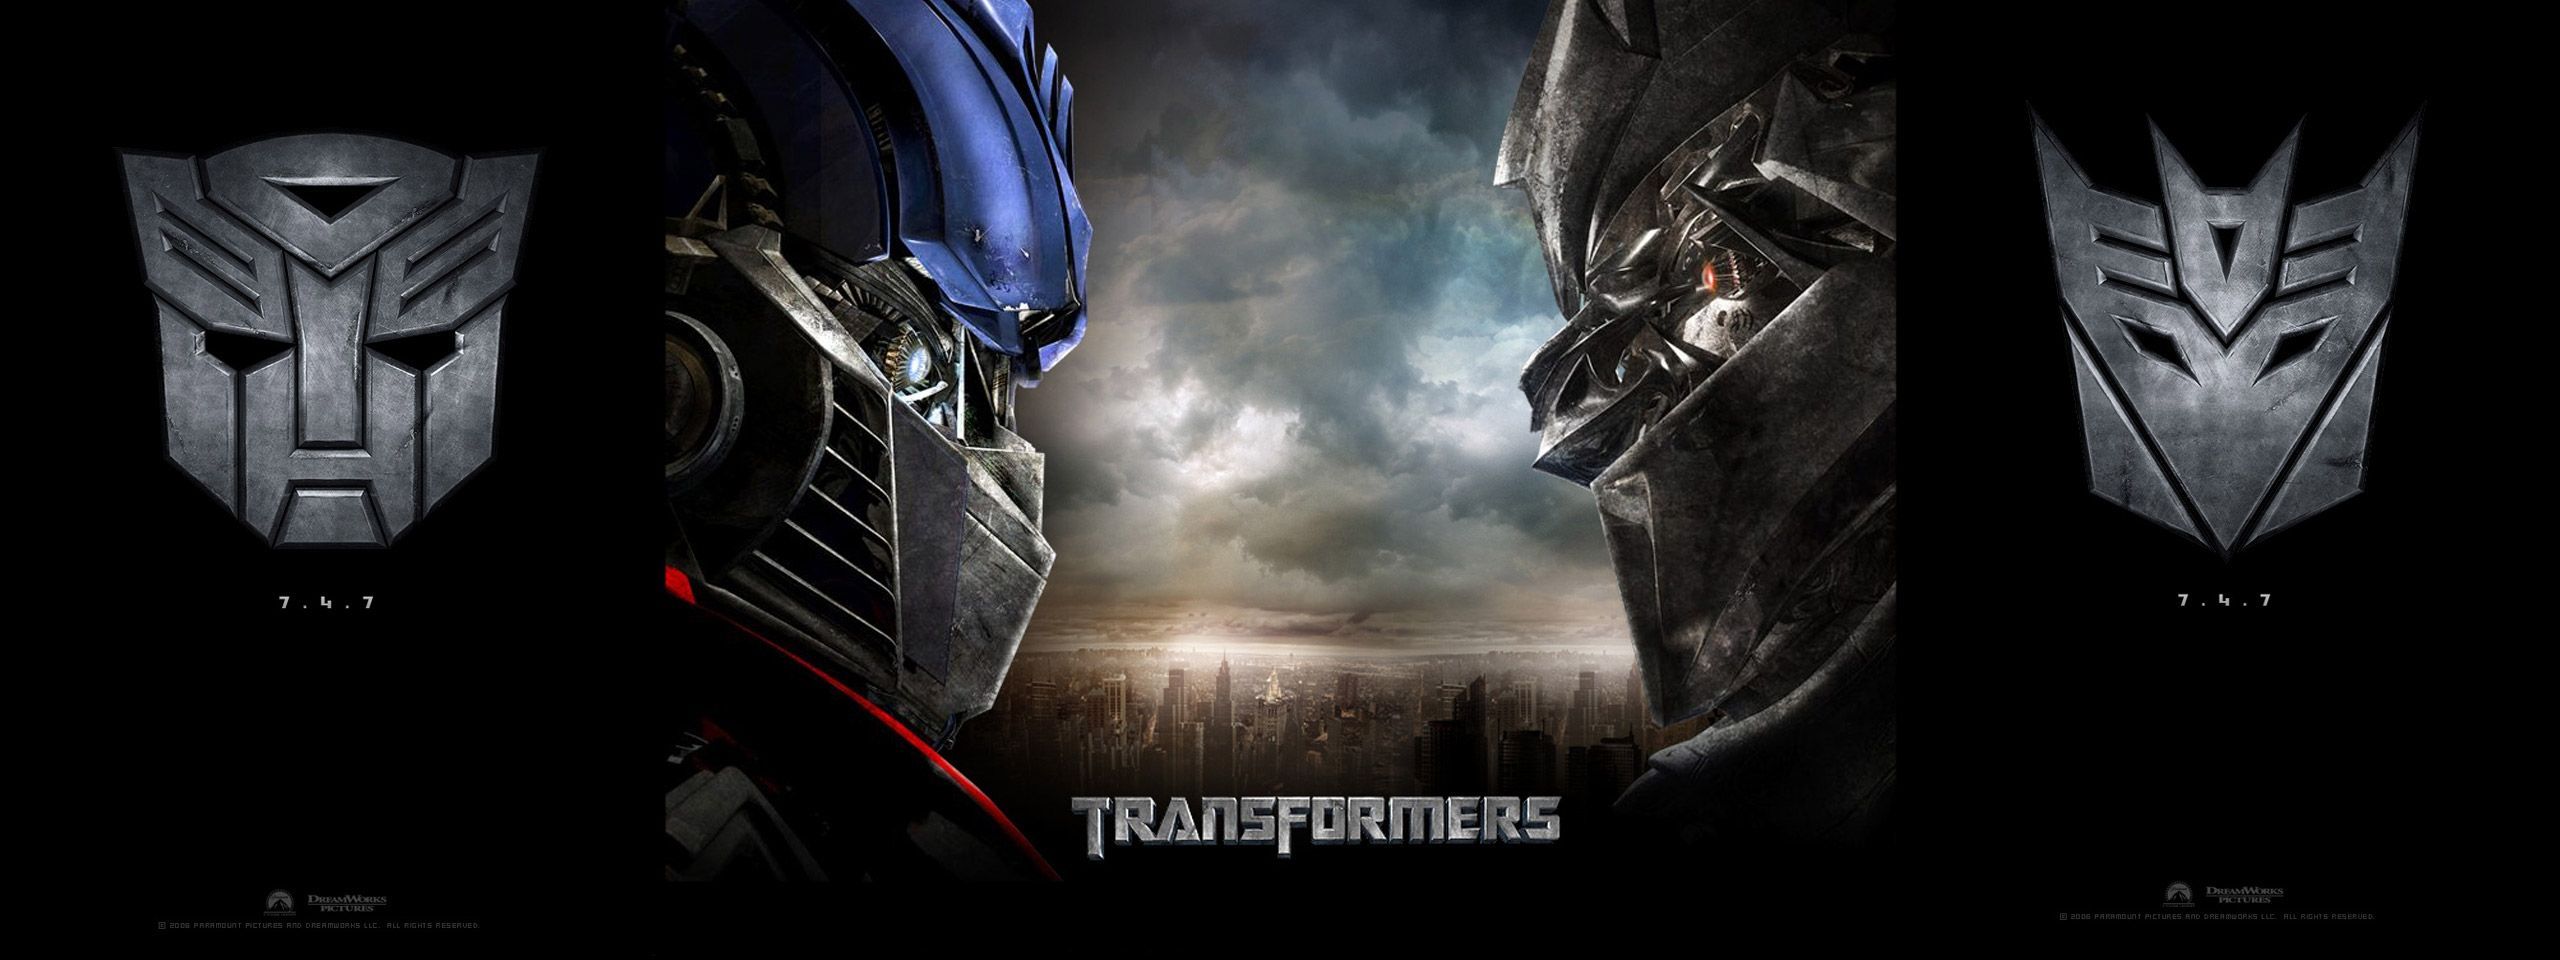 Transformers: Age of Extinction - Pictures Collection Free ...